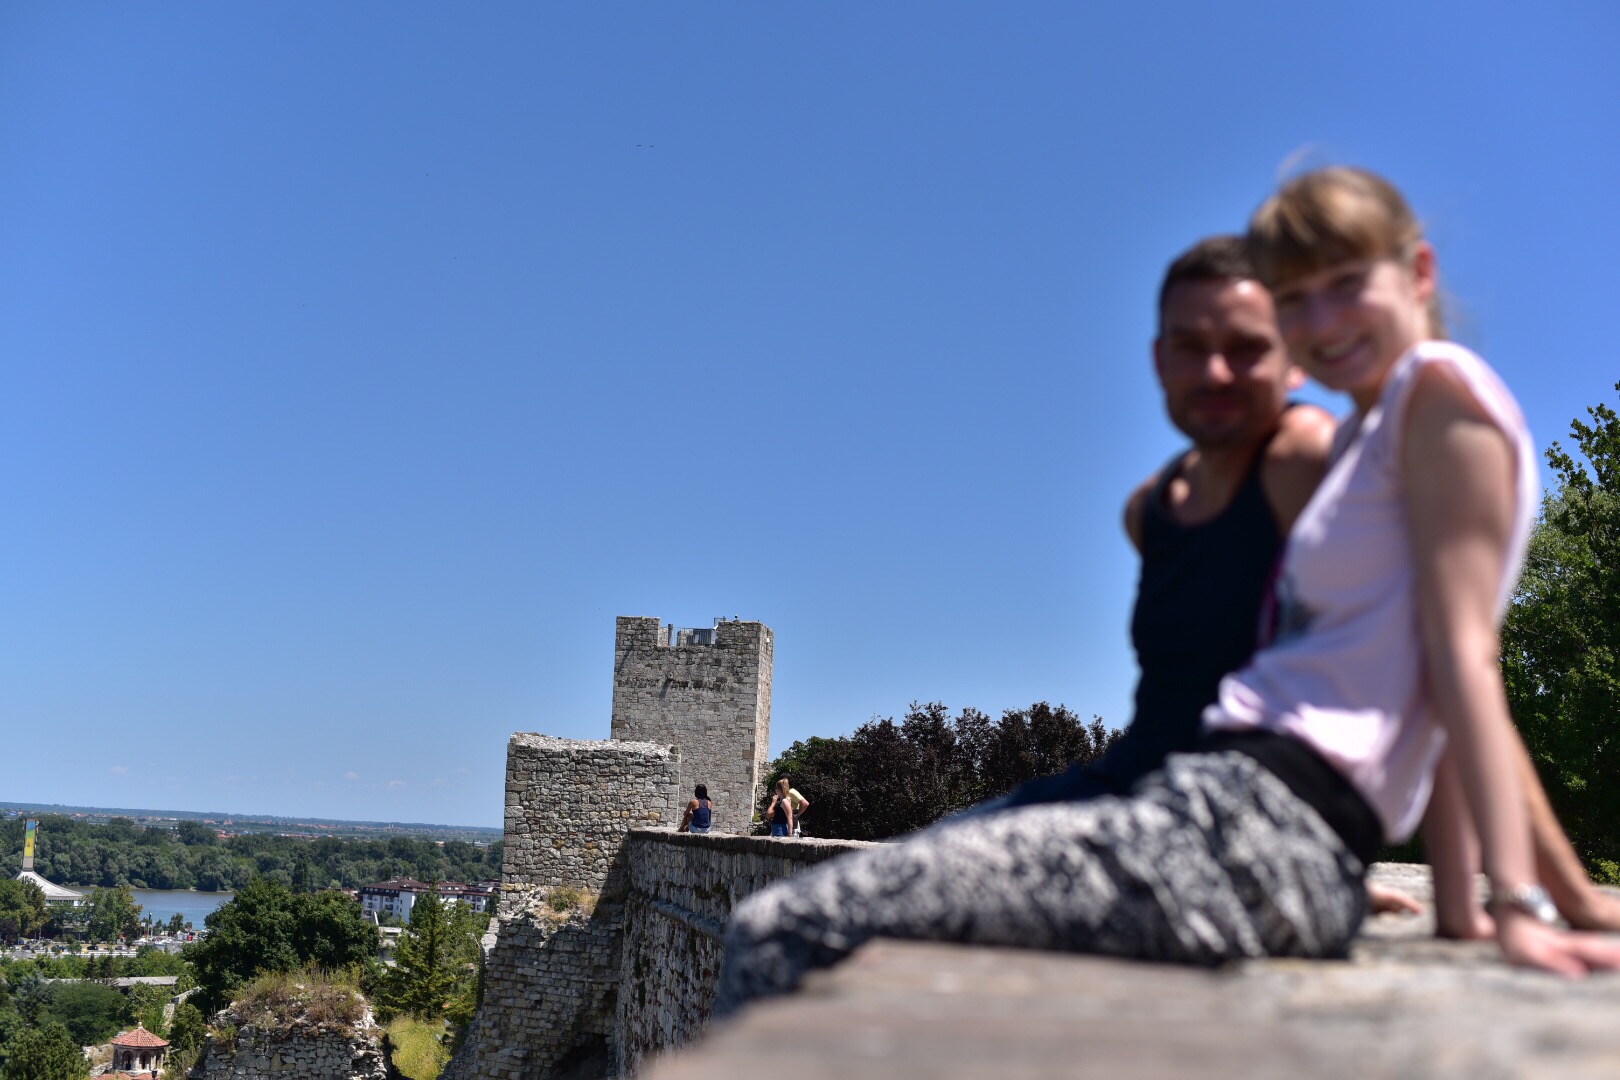 Sitting on the Fortress Walls